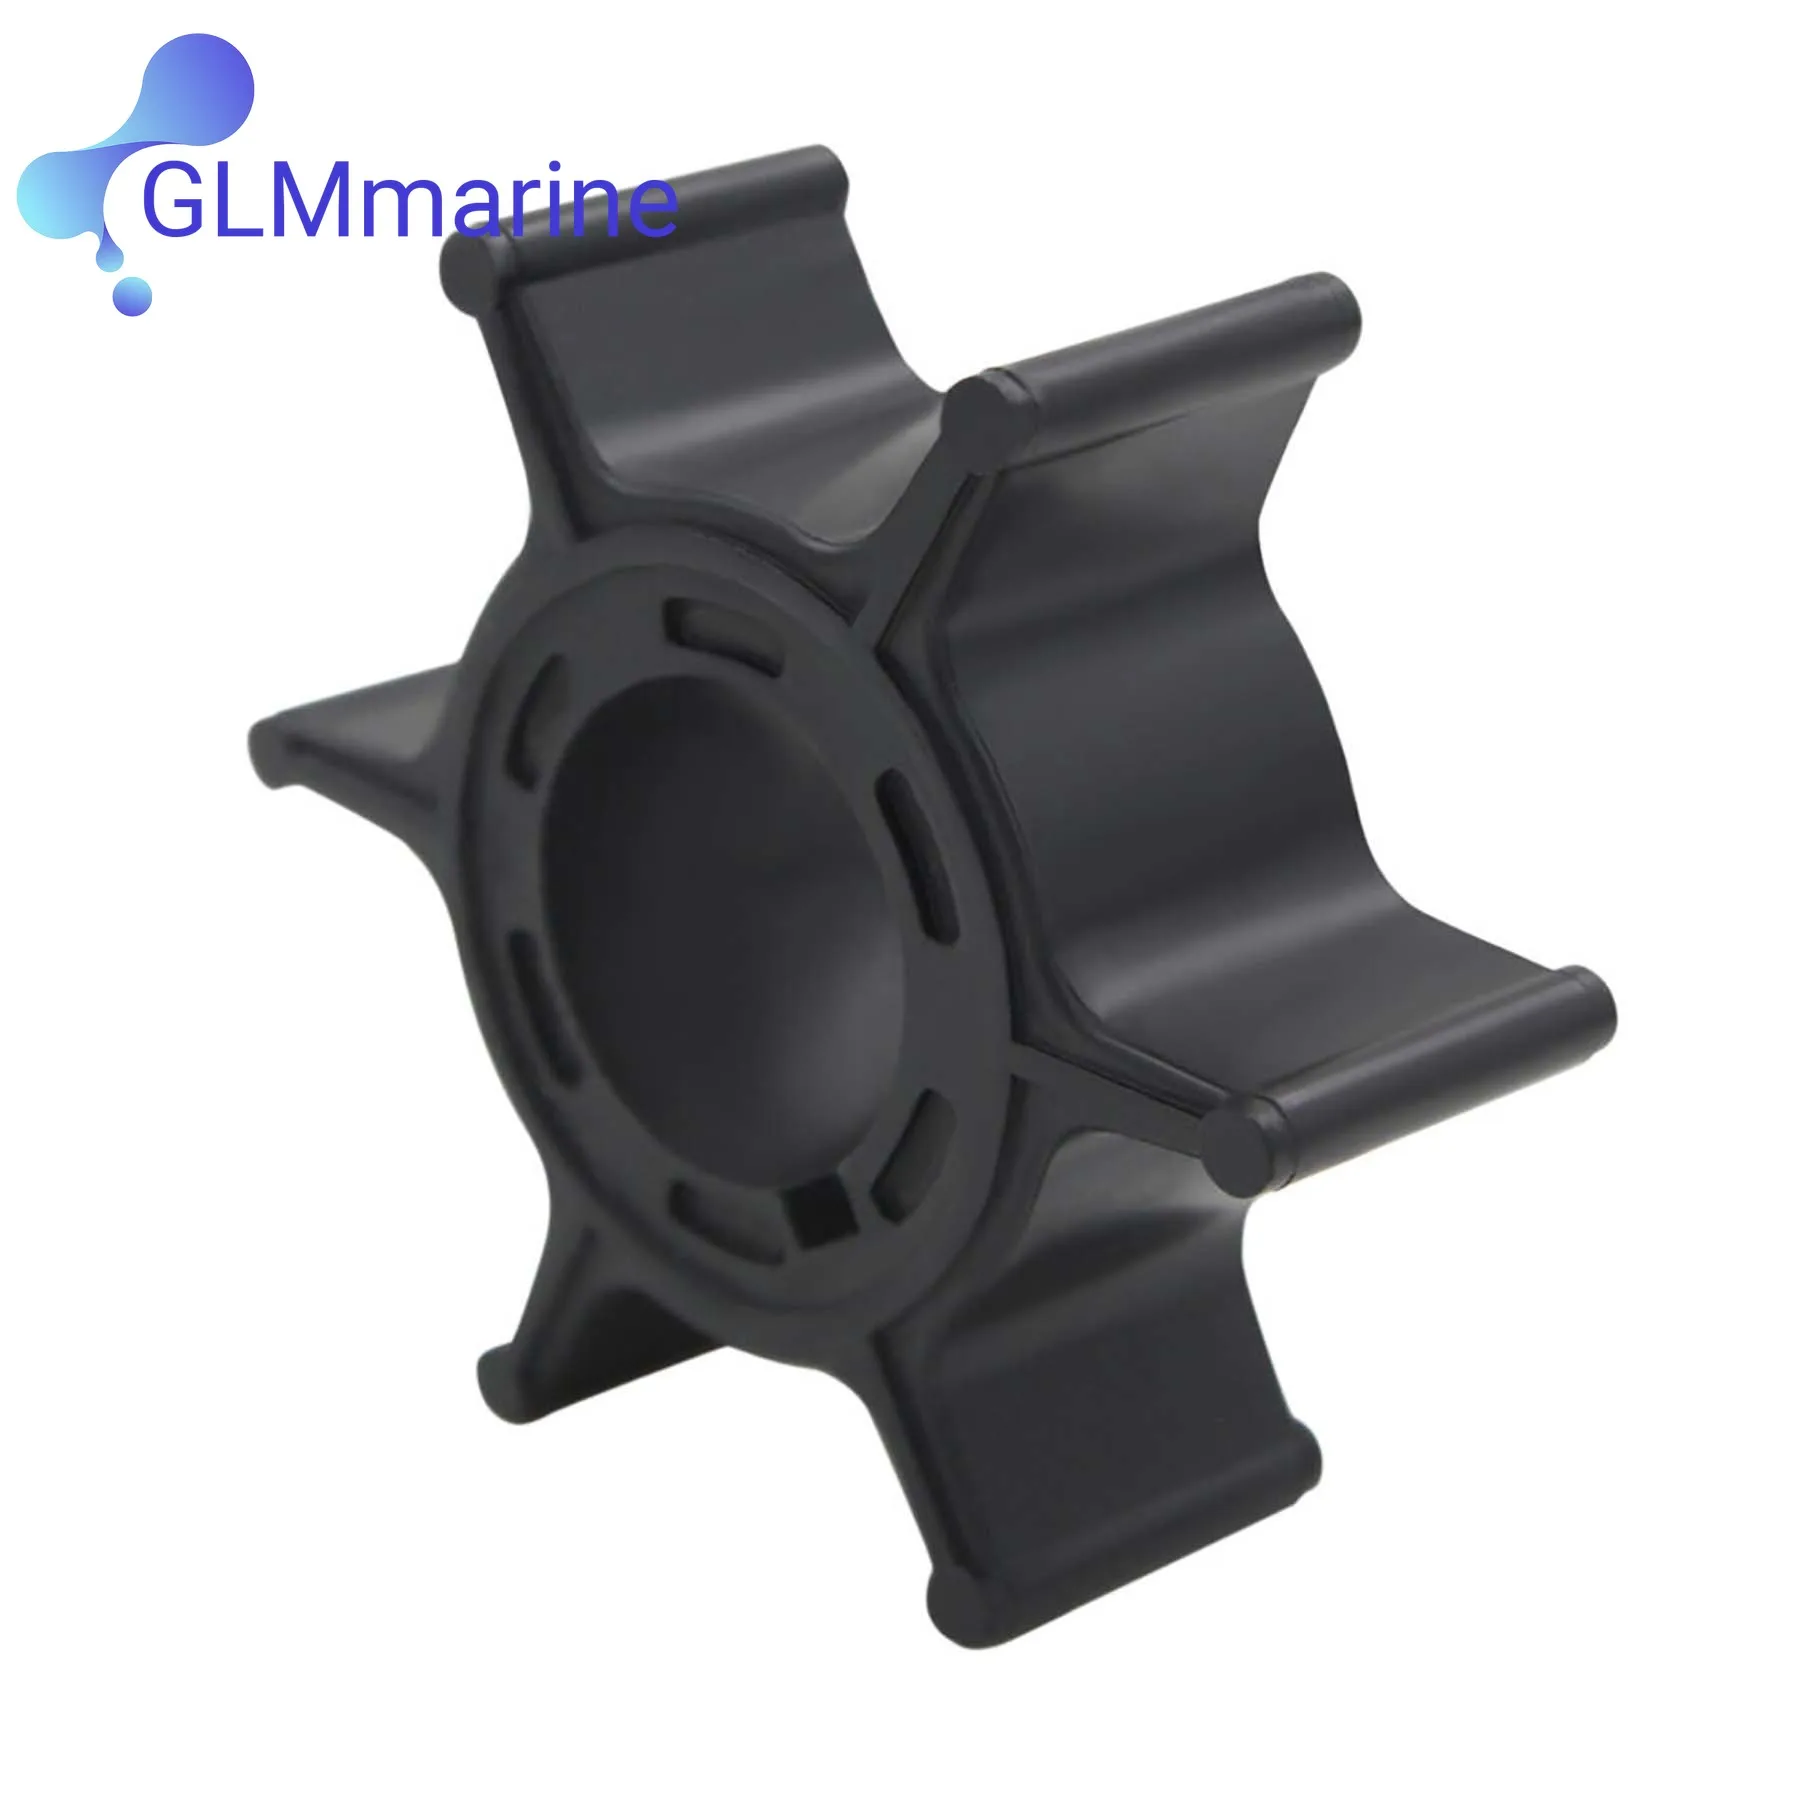 Water Pump Impeller 19210-ZW9-A31 For Honda 8 9.9 10 15 20 HP 4 Stroke BFP8D BFP9.9D BF15D BF20D Outboard Motor 19210-ZW9-A32 19210 zw1 003 303 water pump impeller for honda 75hp bf75at bf75aw 90hp bf90at bf90aw 4 stroke outboard 18 3056 89630 500301